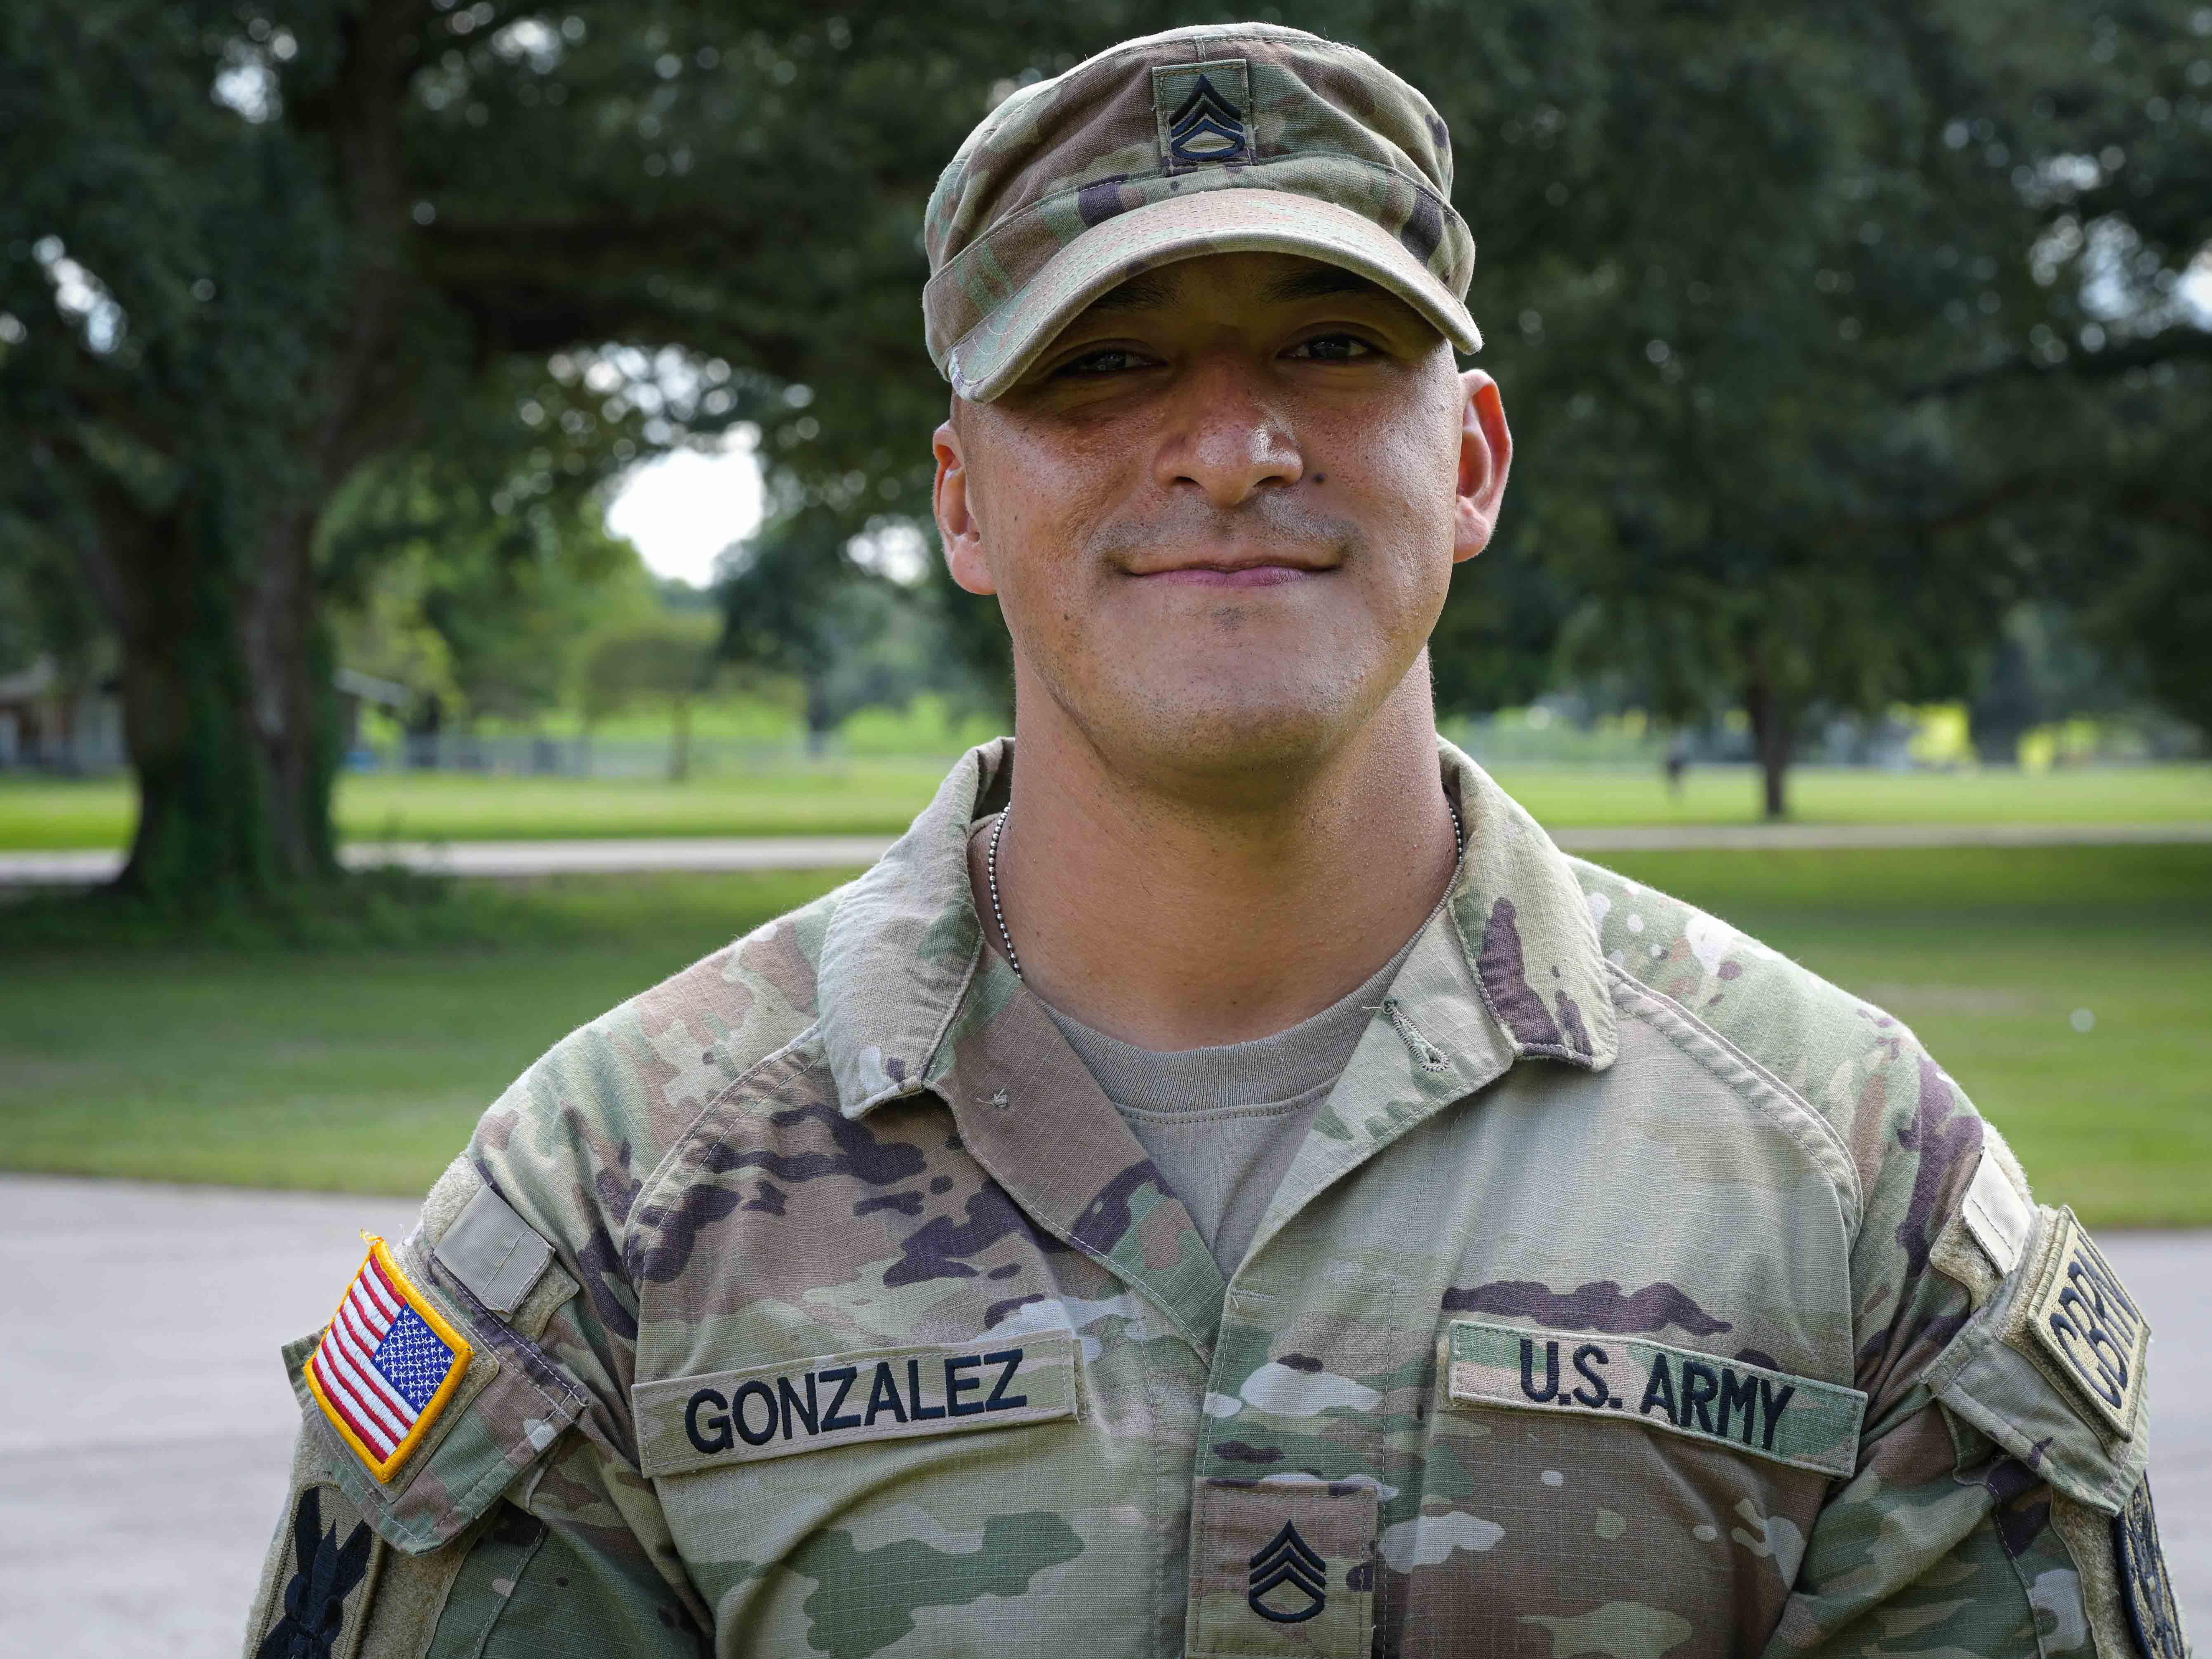 Staff Sgt. Andy Gonzalez’s grit embodies culture, Army value